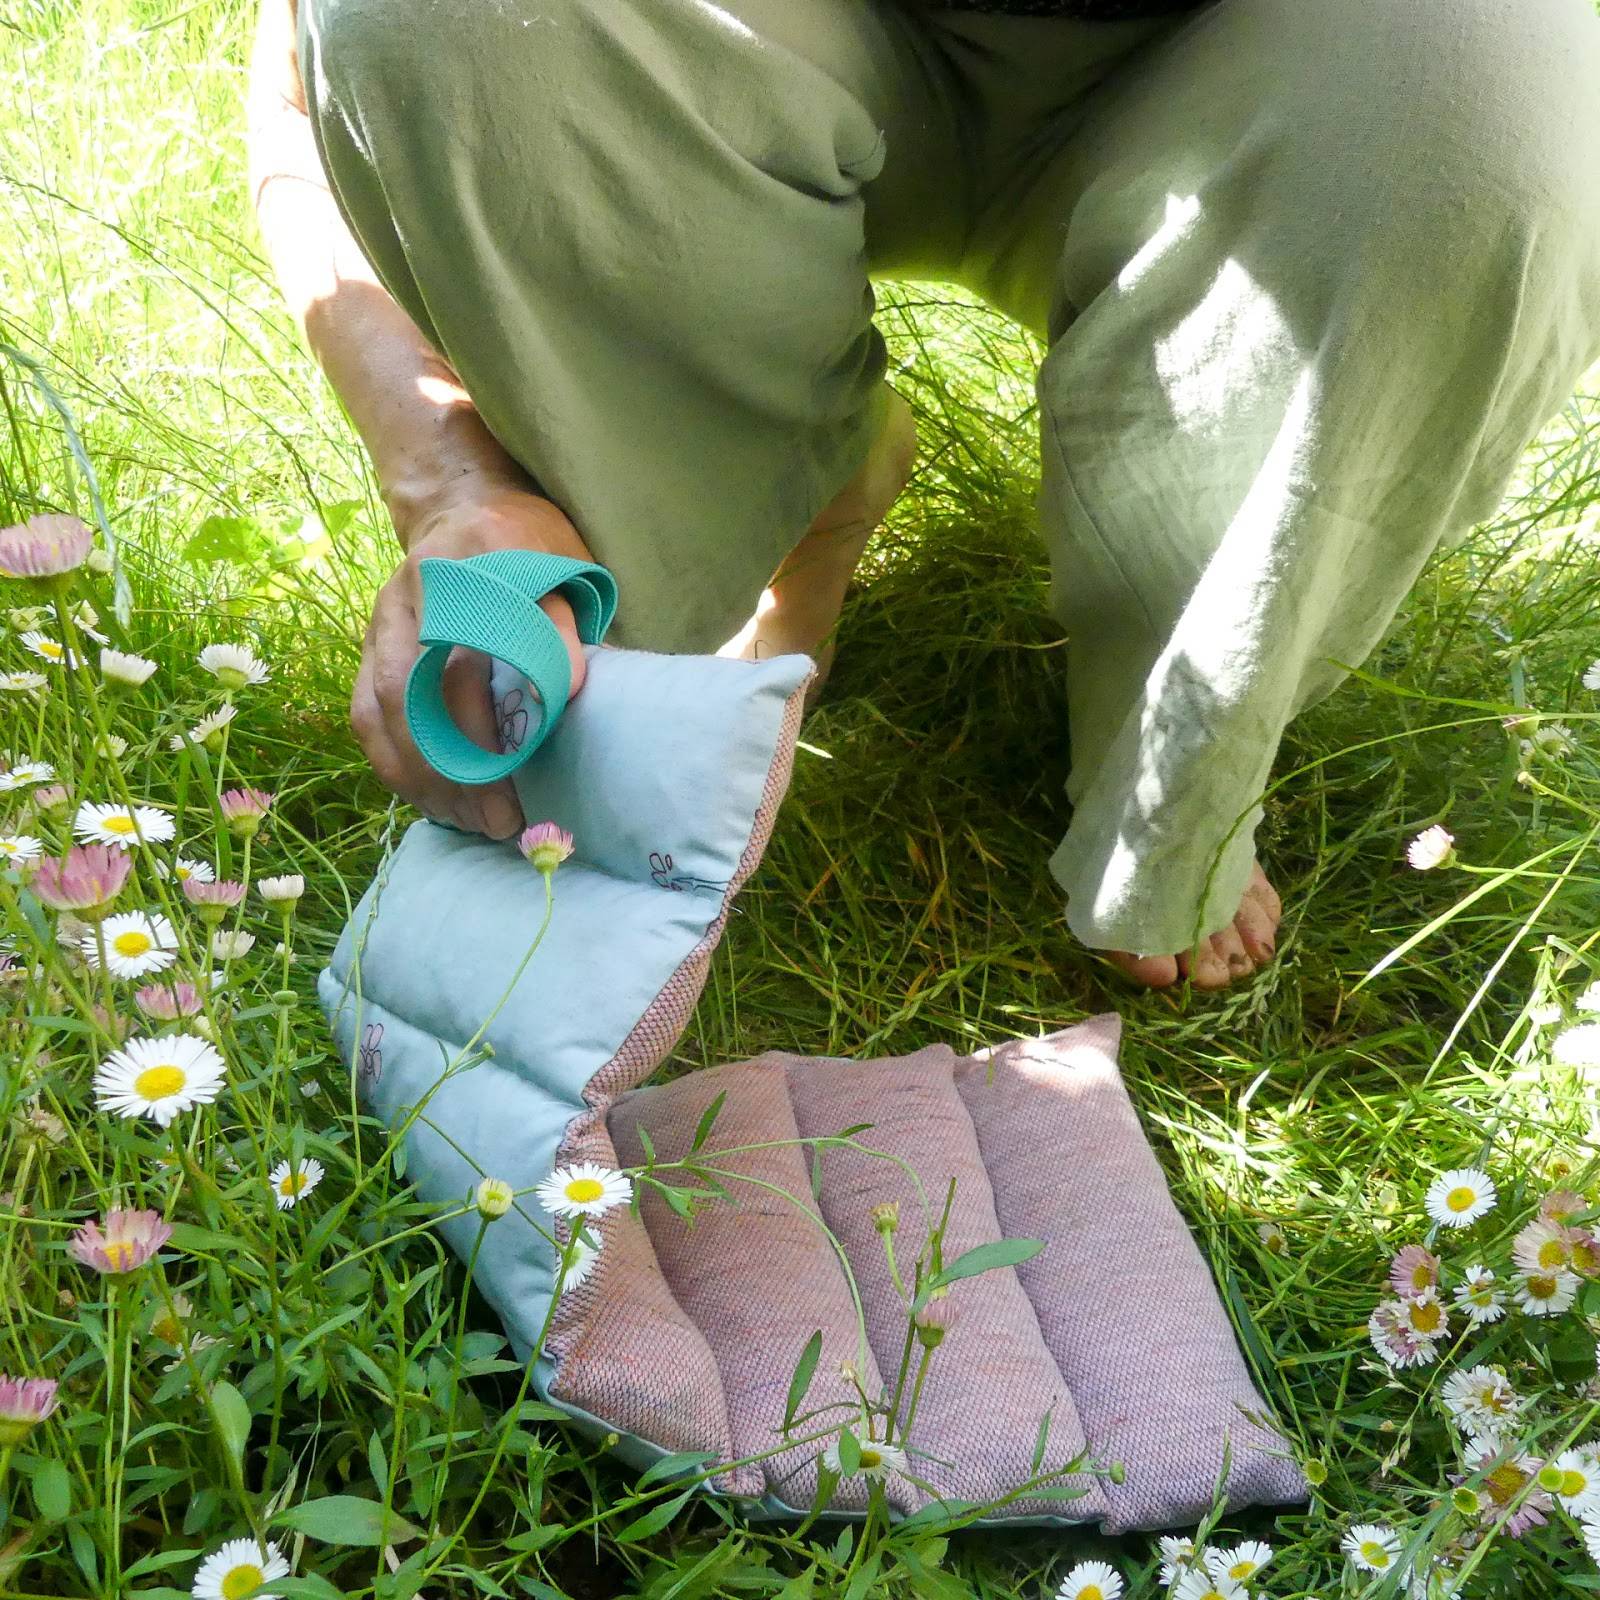 gardeing knee pad on the grass with little flowers